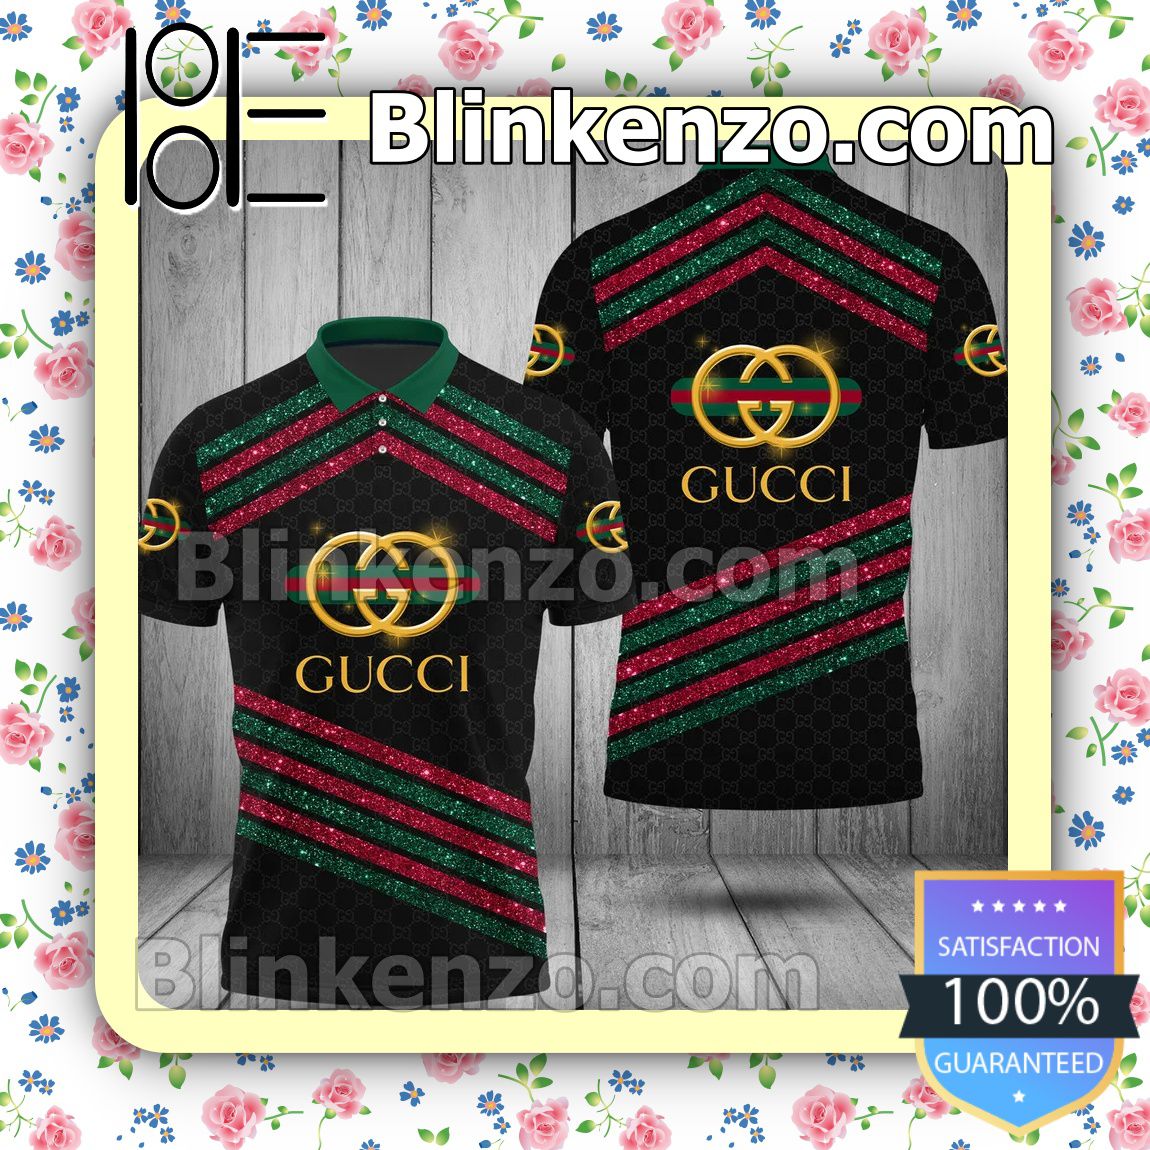 Gucci Monogram And Twinkle Stripes Black Embroidered Polo Shirts